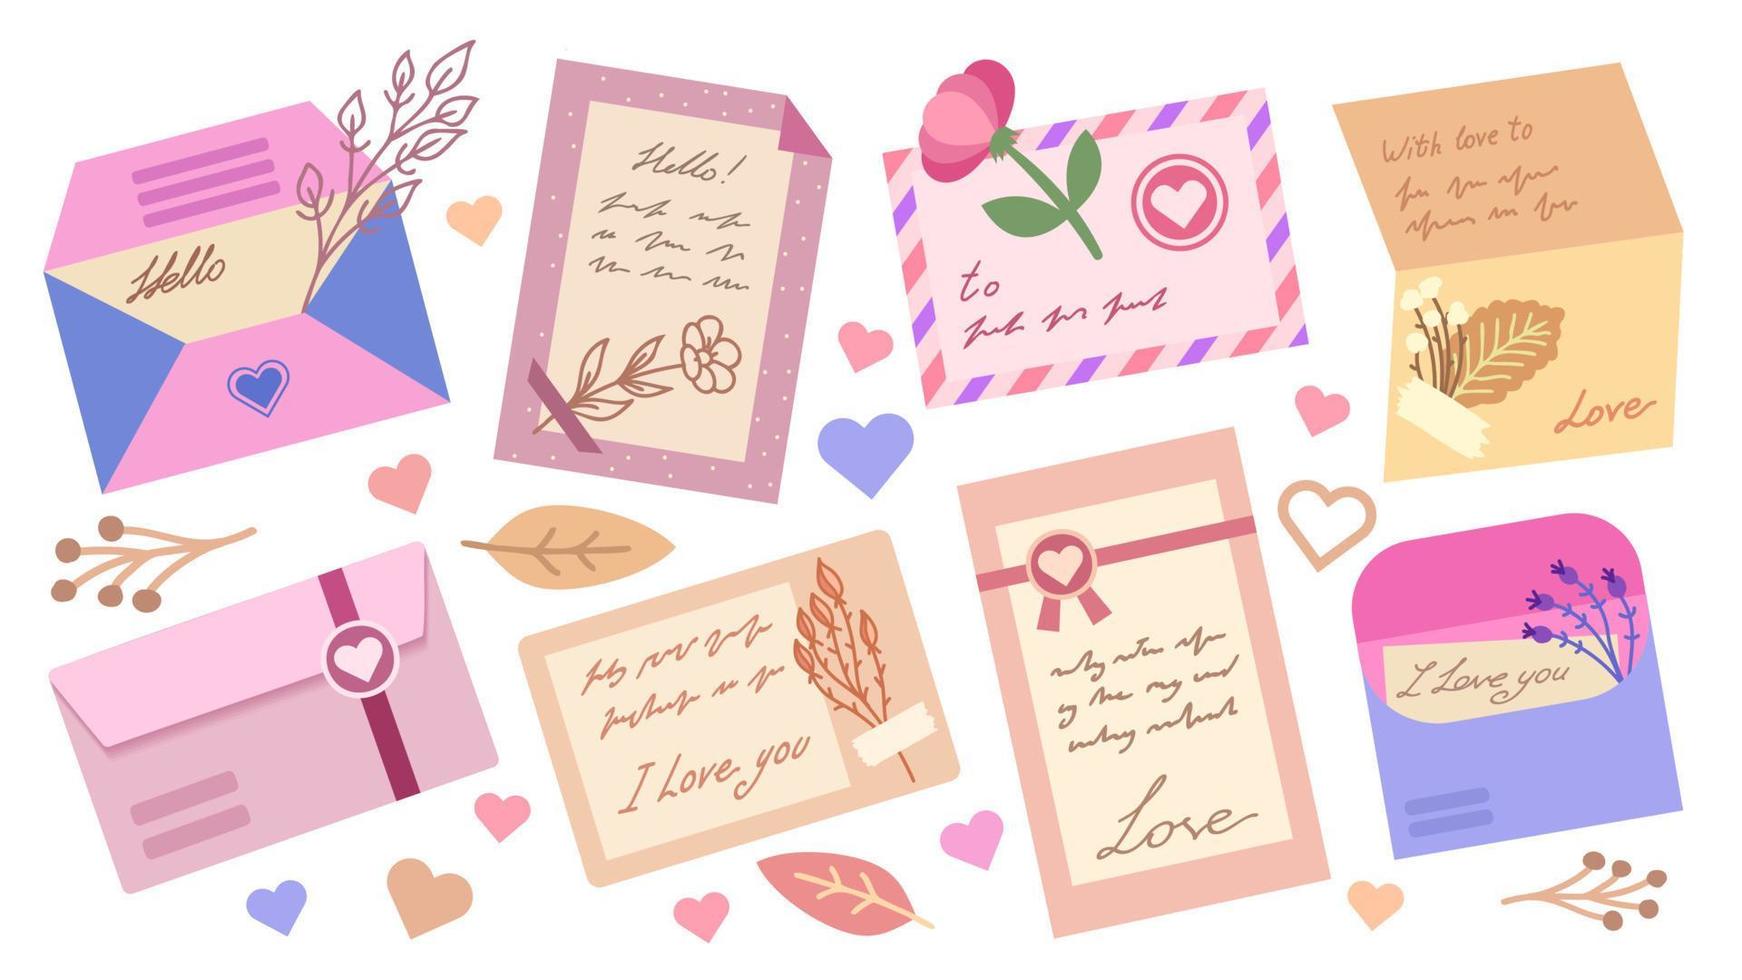 Colorful flat envelops and postcards. Love letters with hearts, flowers, and leaves. Love, friendship and greeting letters for web, social media, crafts, printing design and other. vector